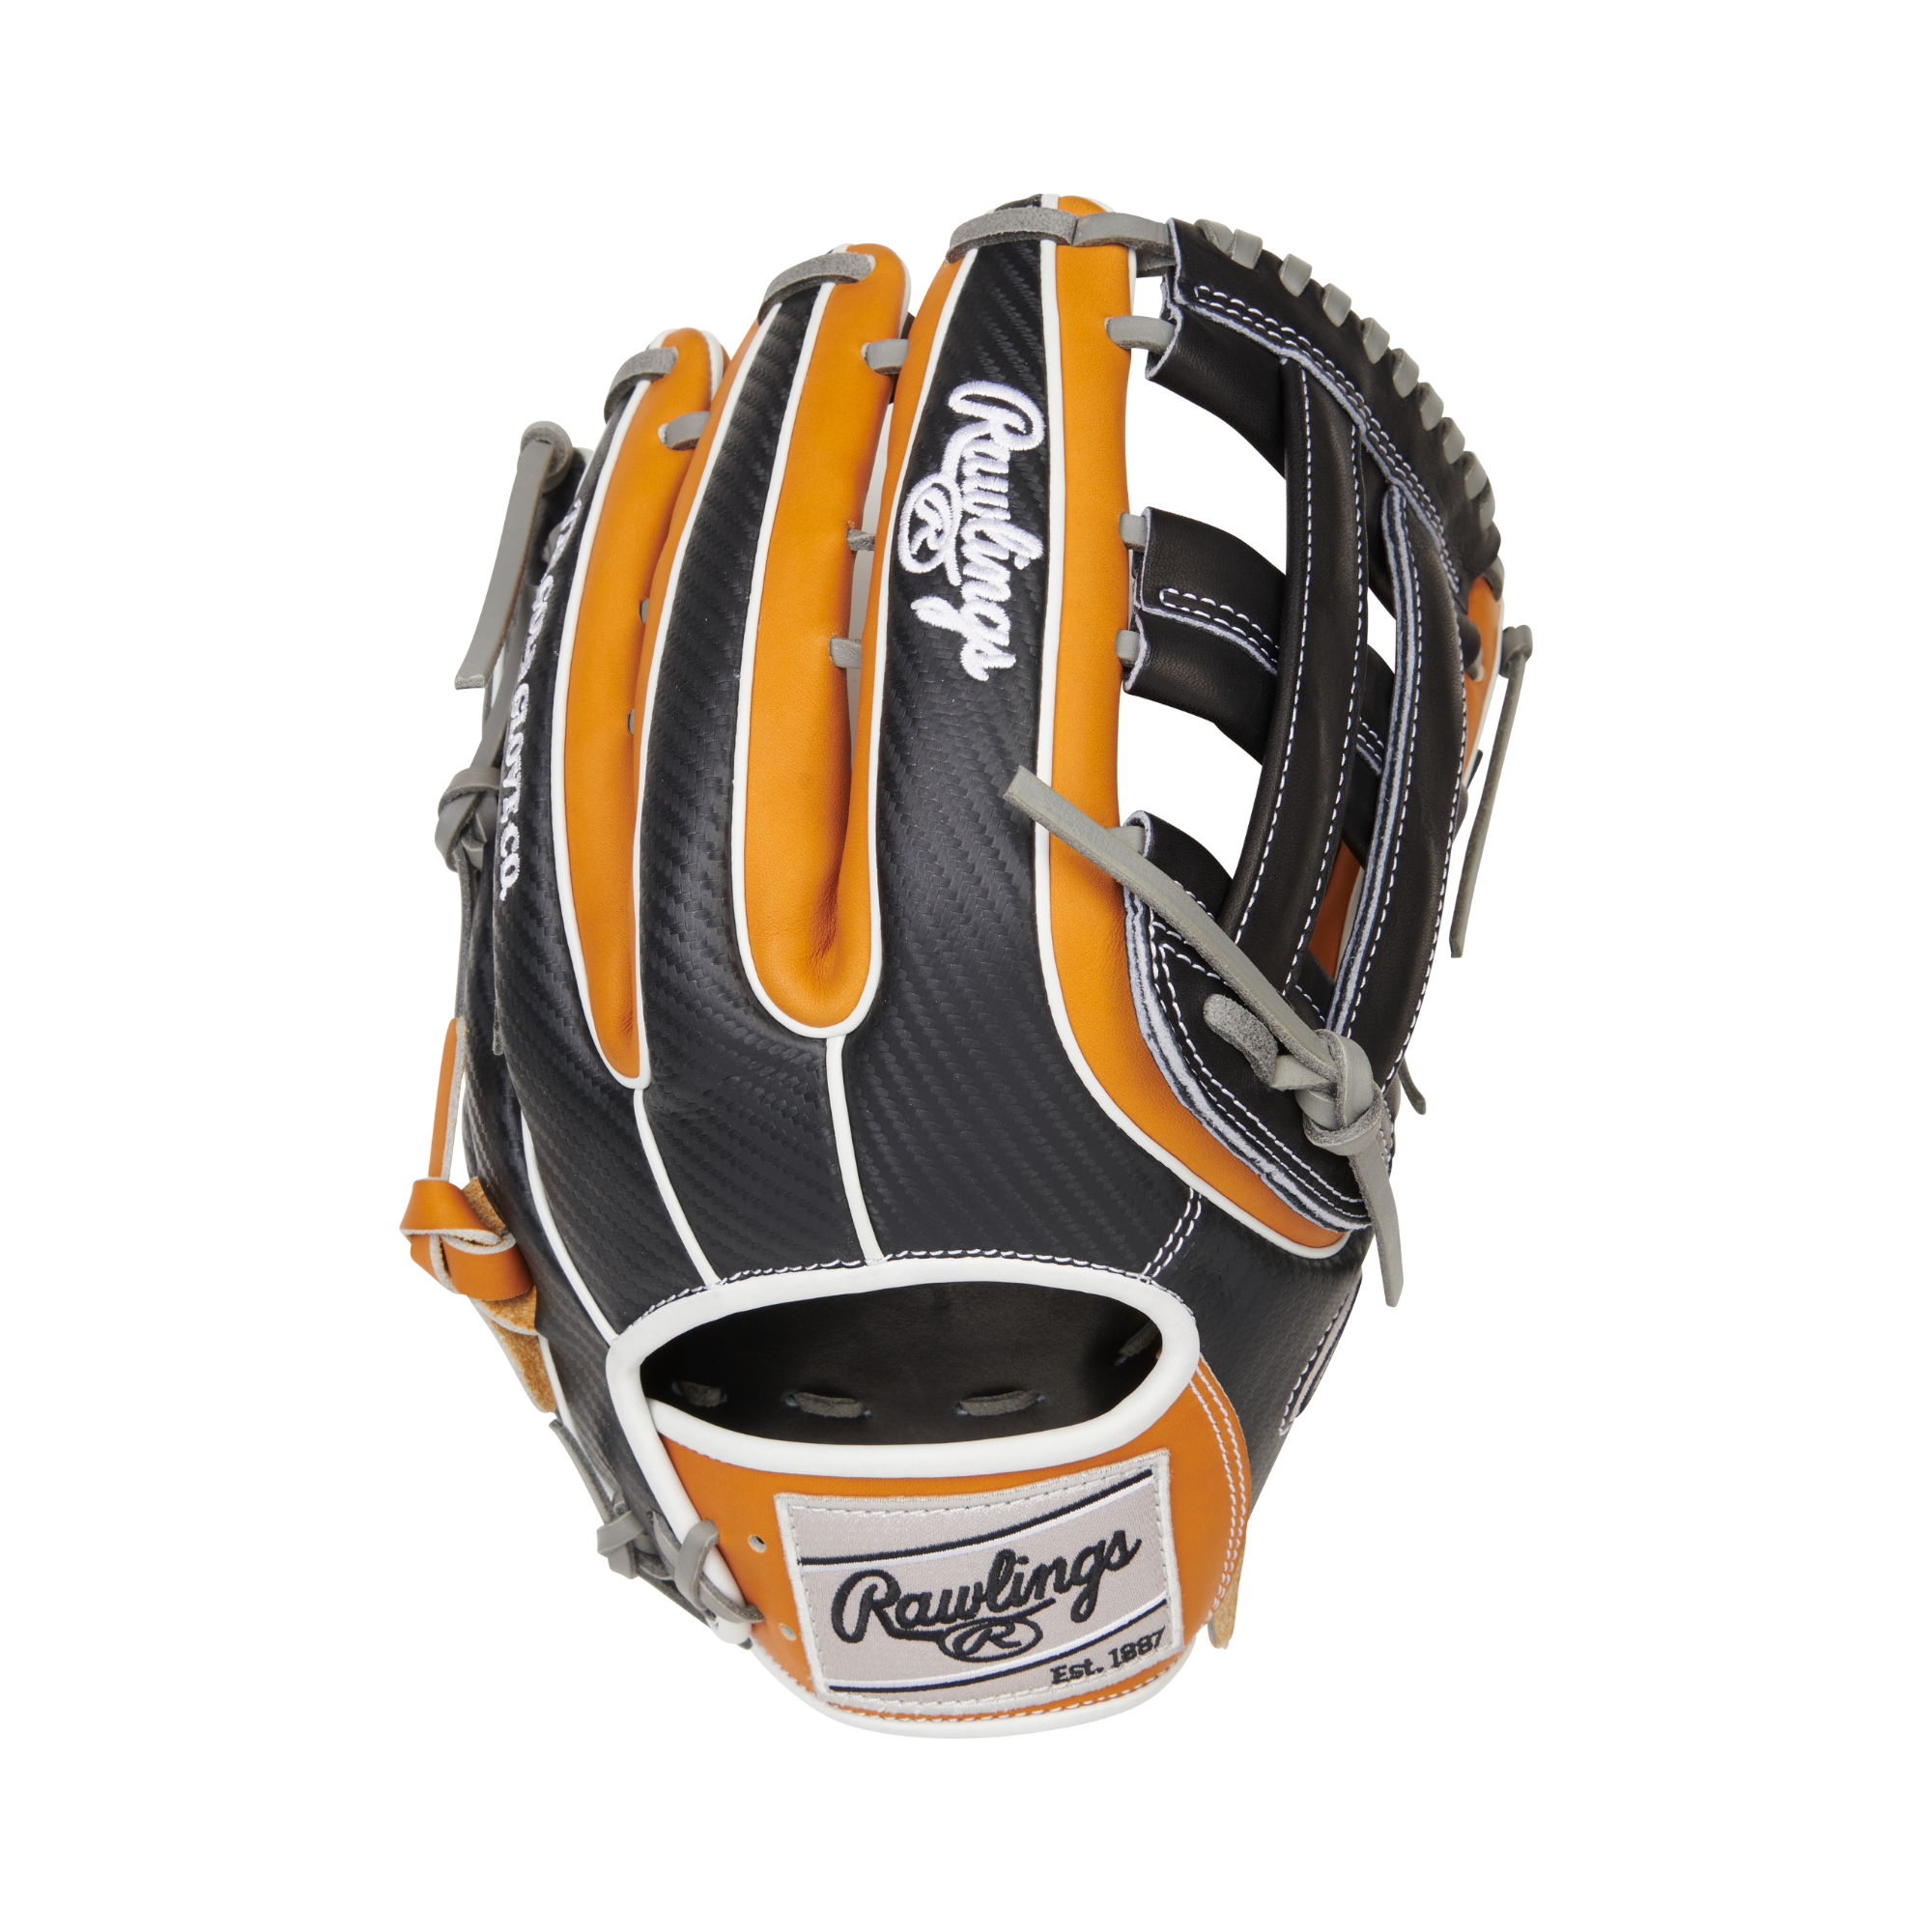 Rawlings Heart of the Hide Hyper Shell Outfield Glove Pro H Web LHT 12.75"